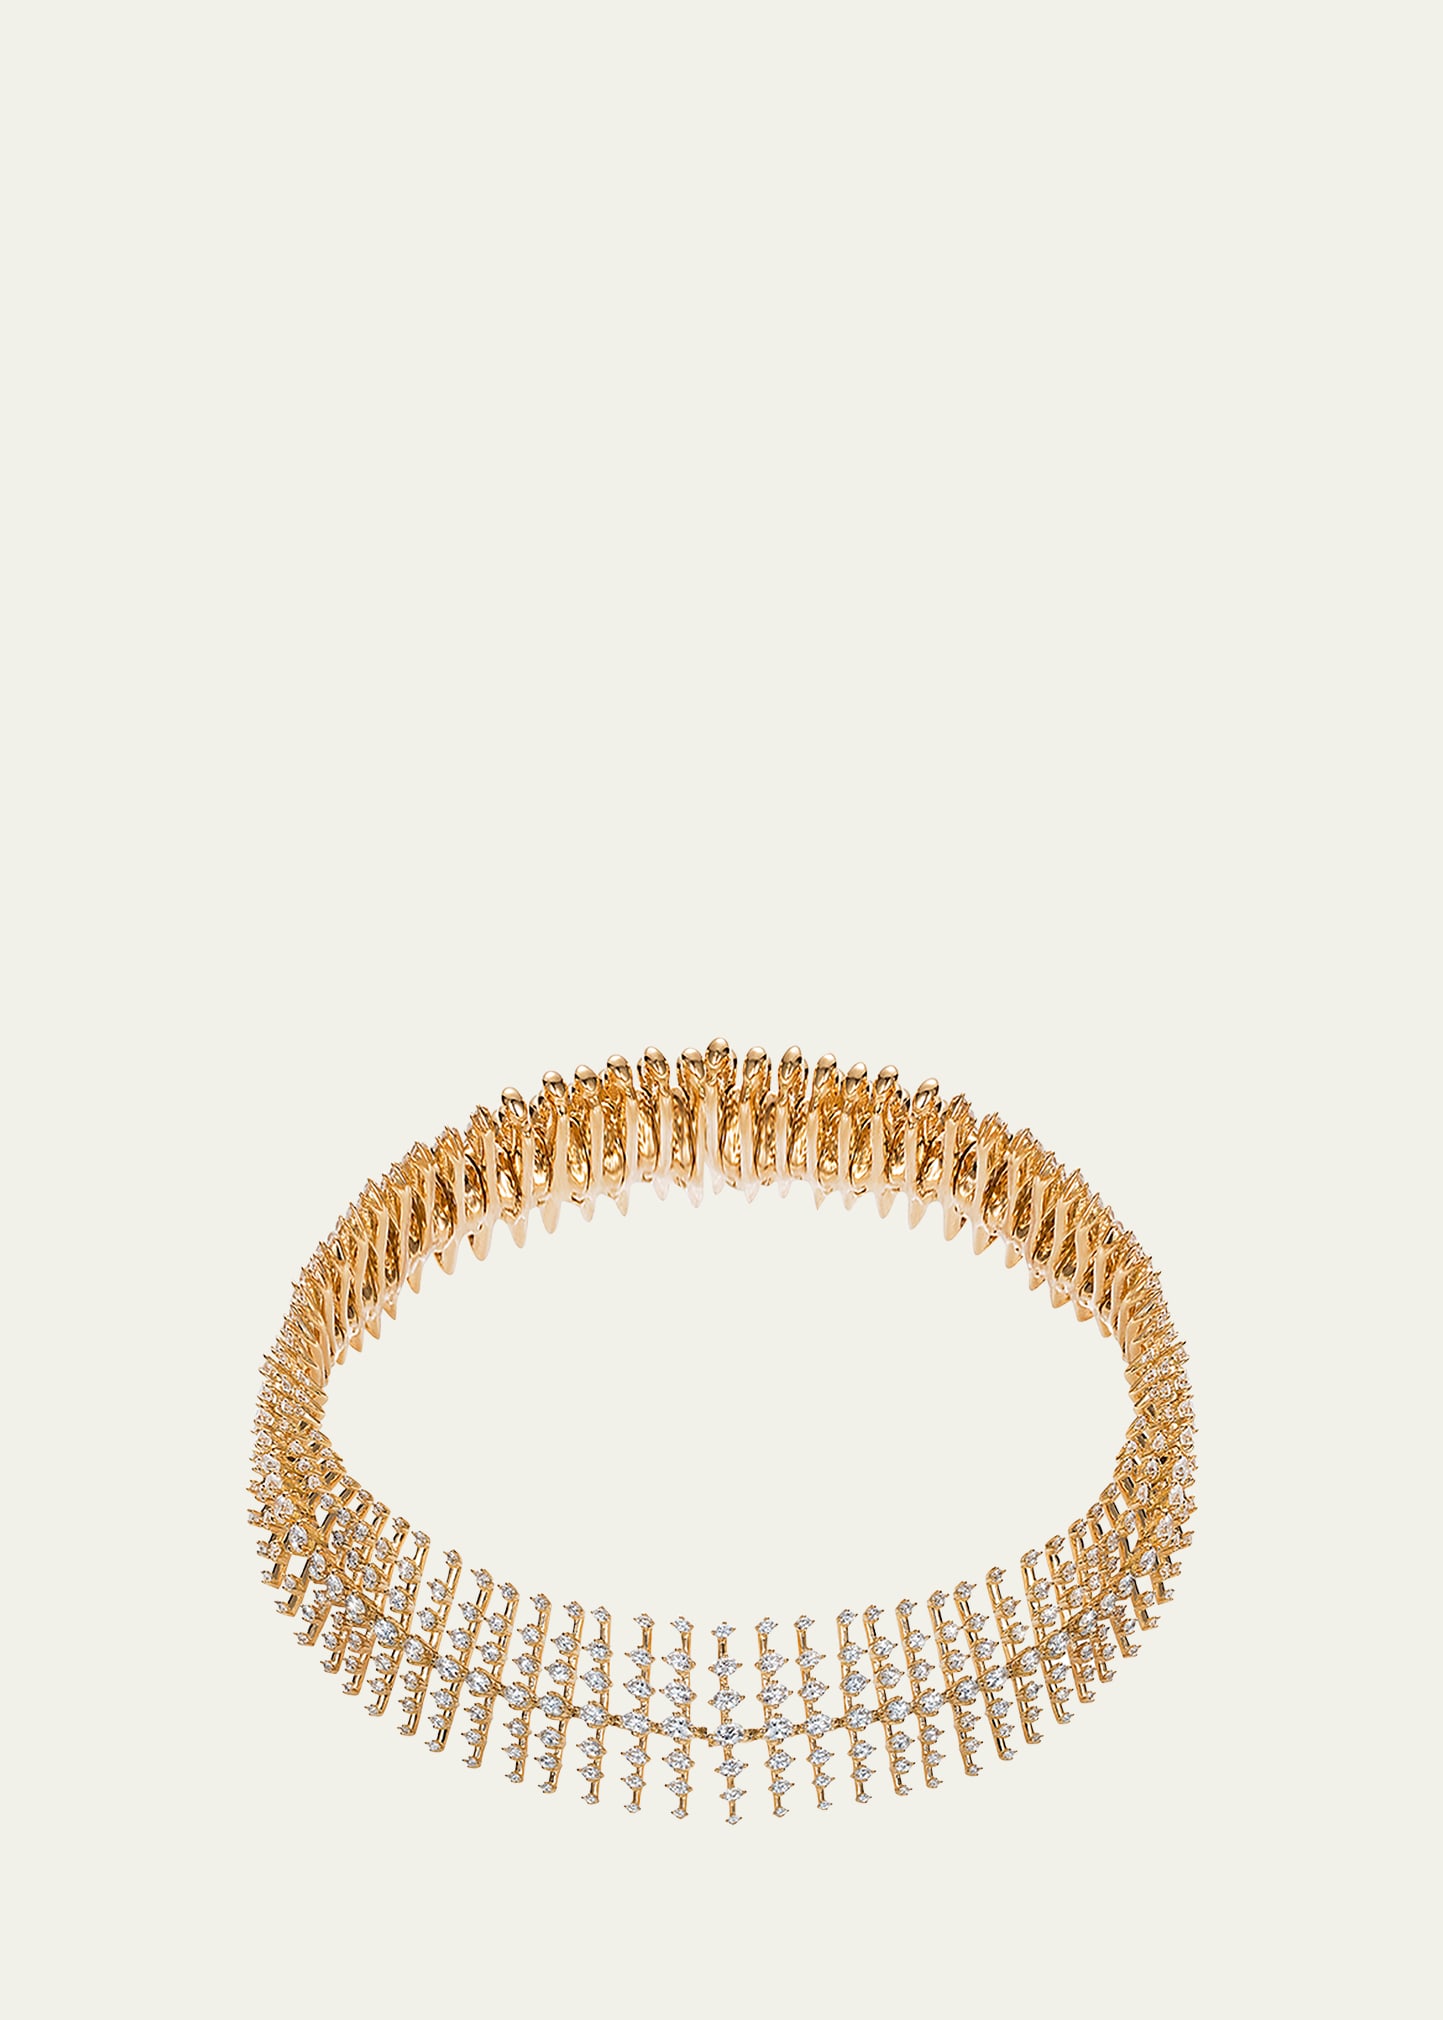 Disco Small Bracelet in Yellow Gold and Diamonds